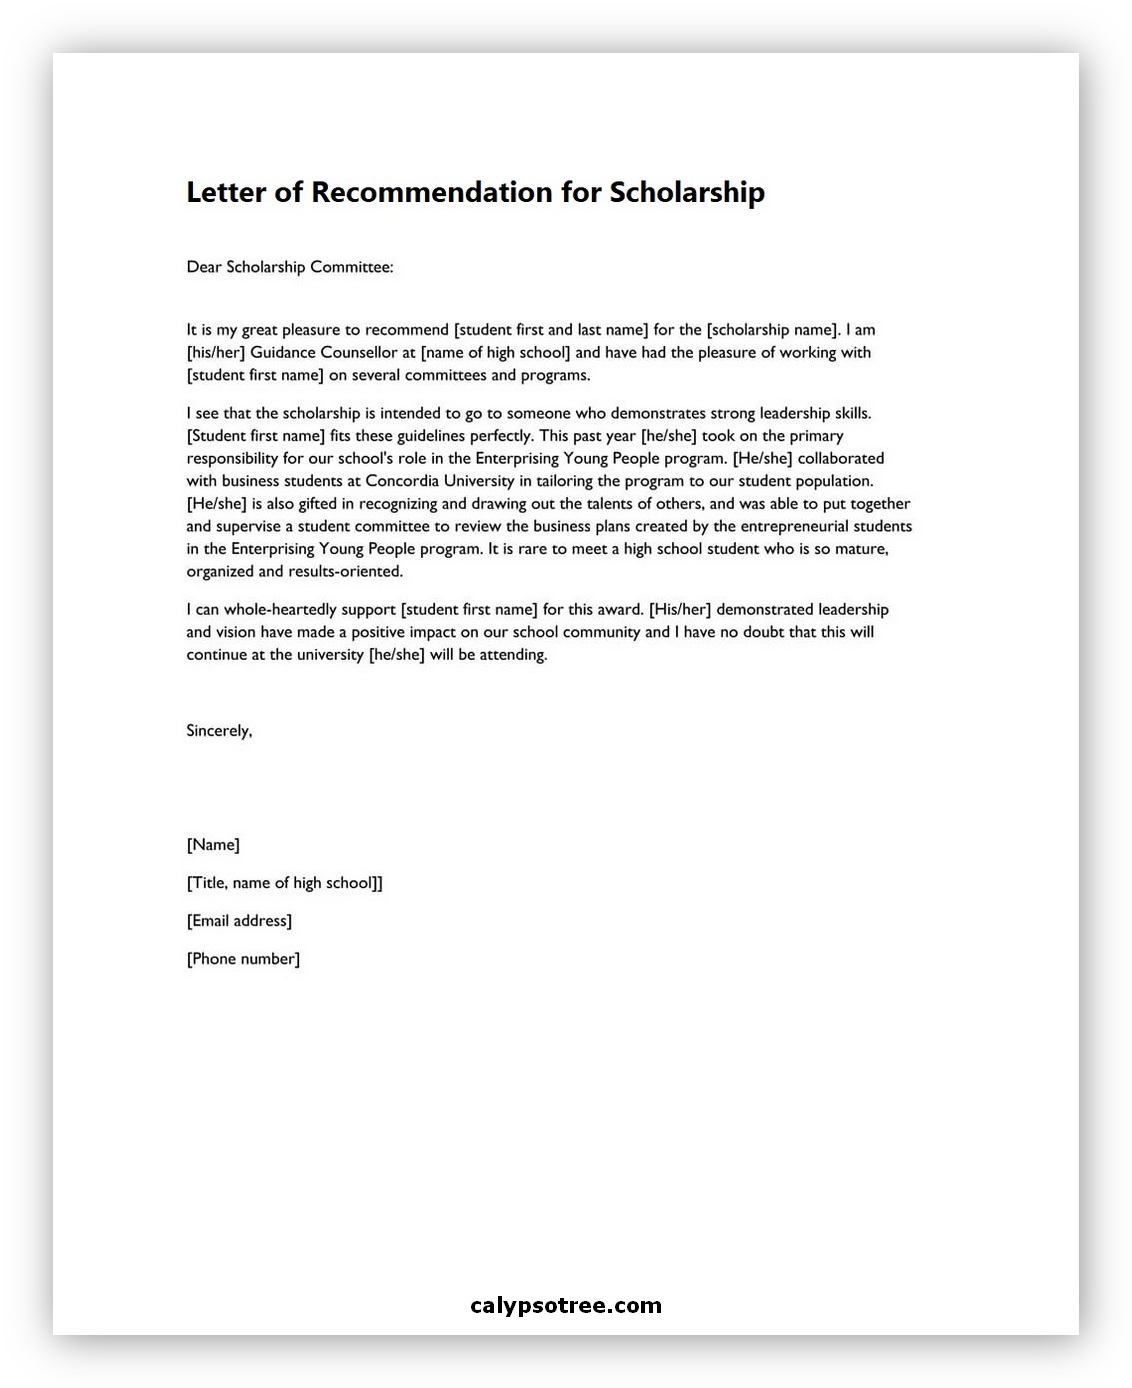 Letter of Recommendation for Scholarship 01